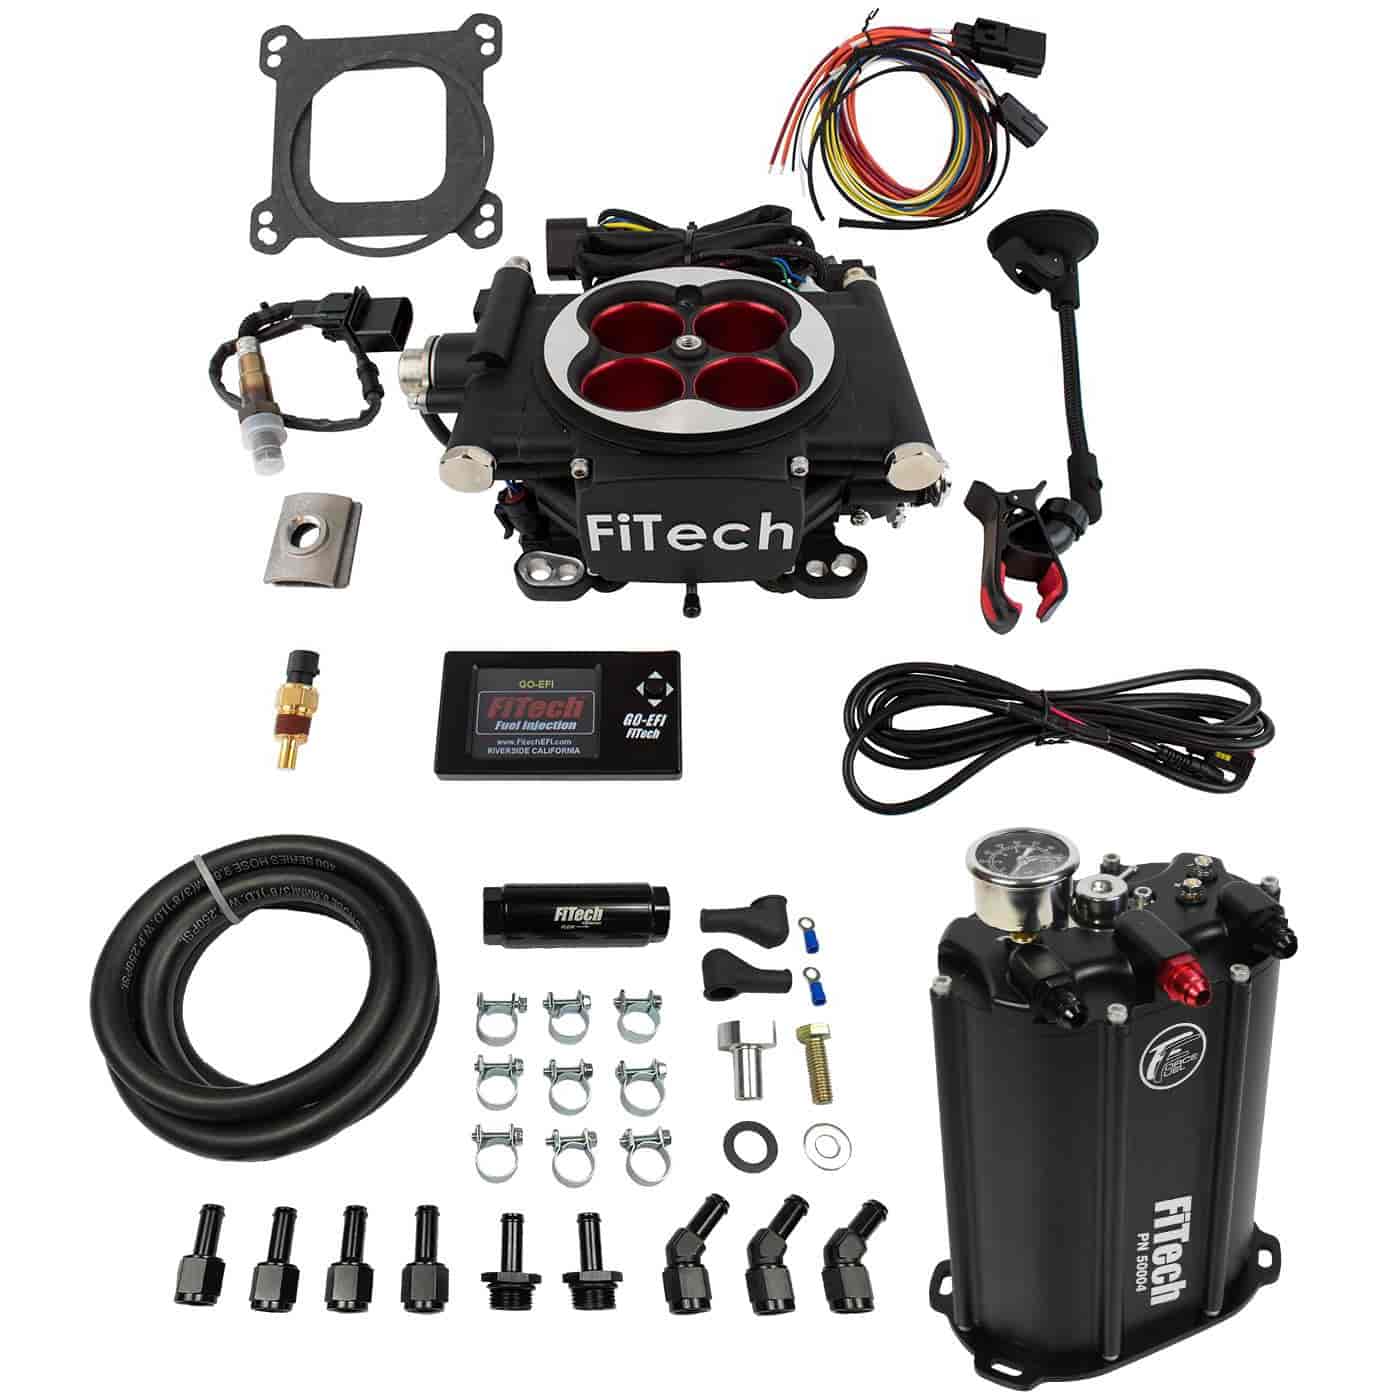 Go EFI-4 Power Adder 600 HP Throttle Body System Master Kit with Force Fuel System